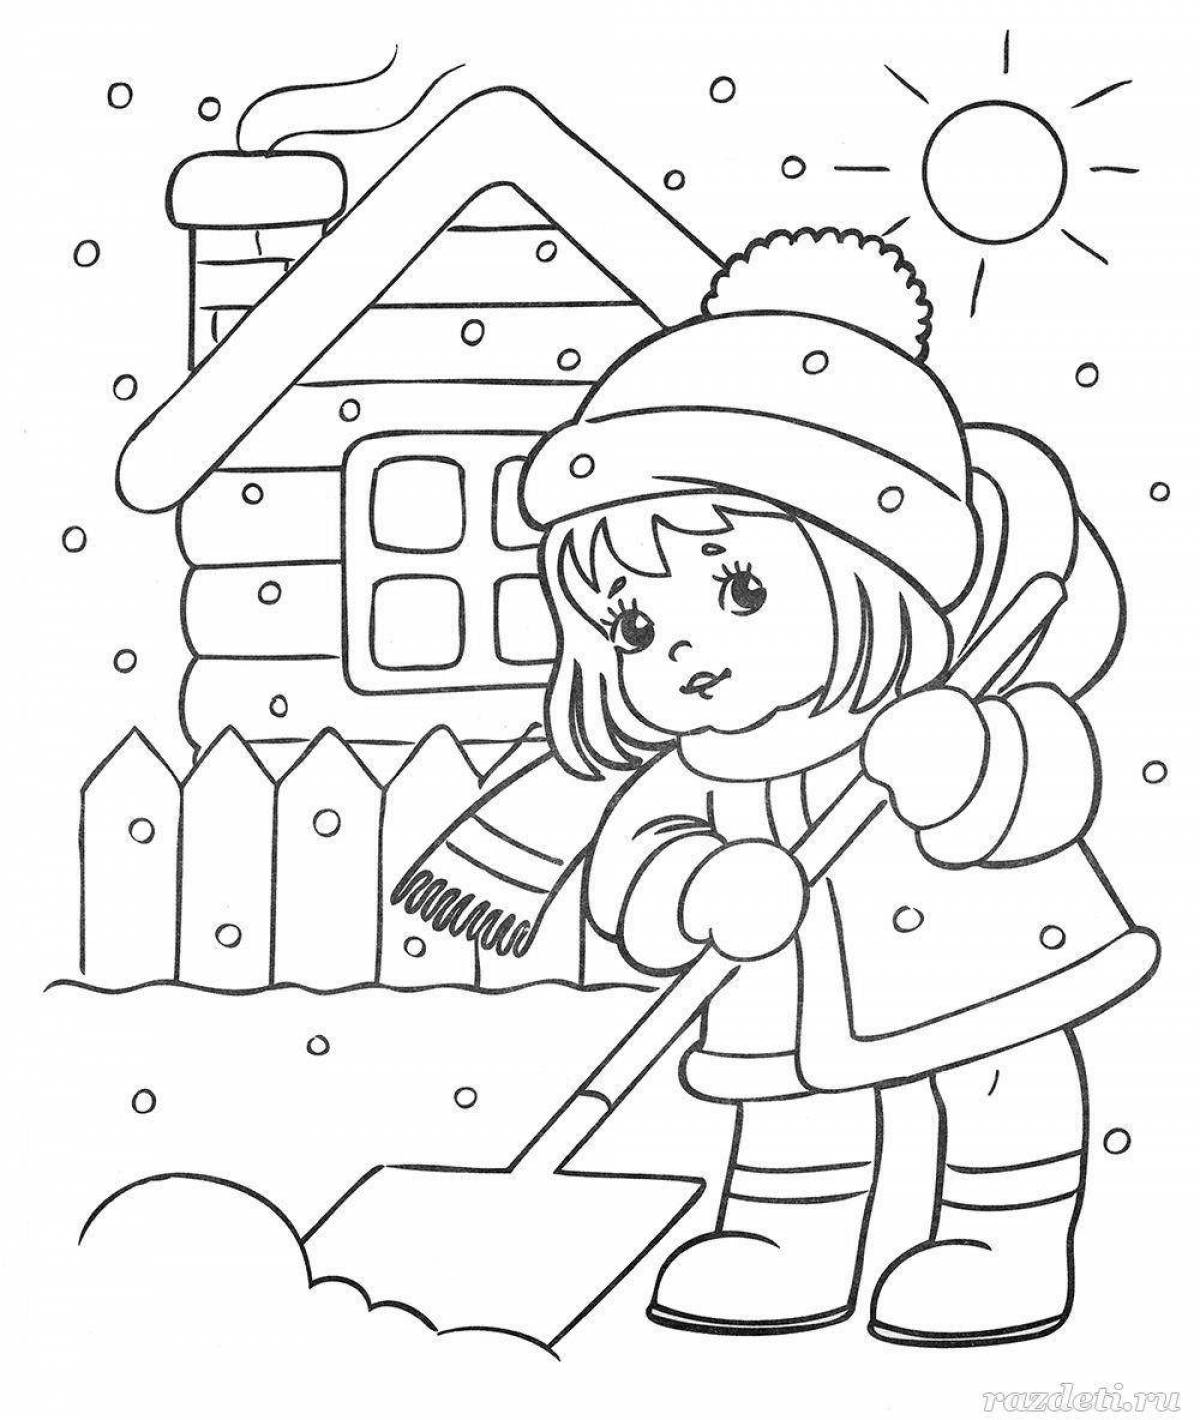 Live winter coloring book for children 2-3 years old